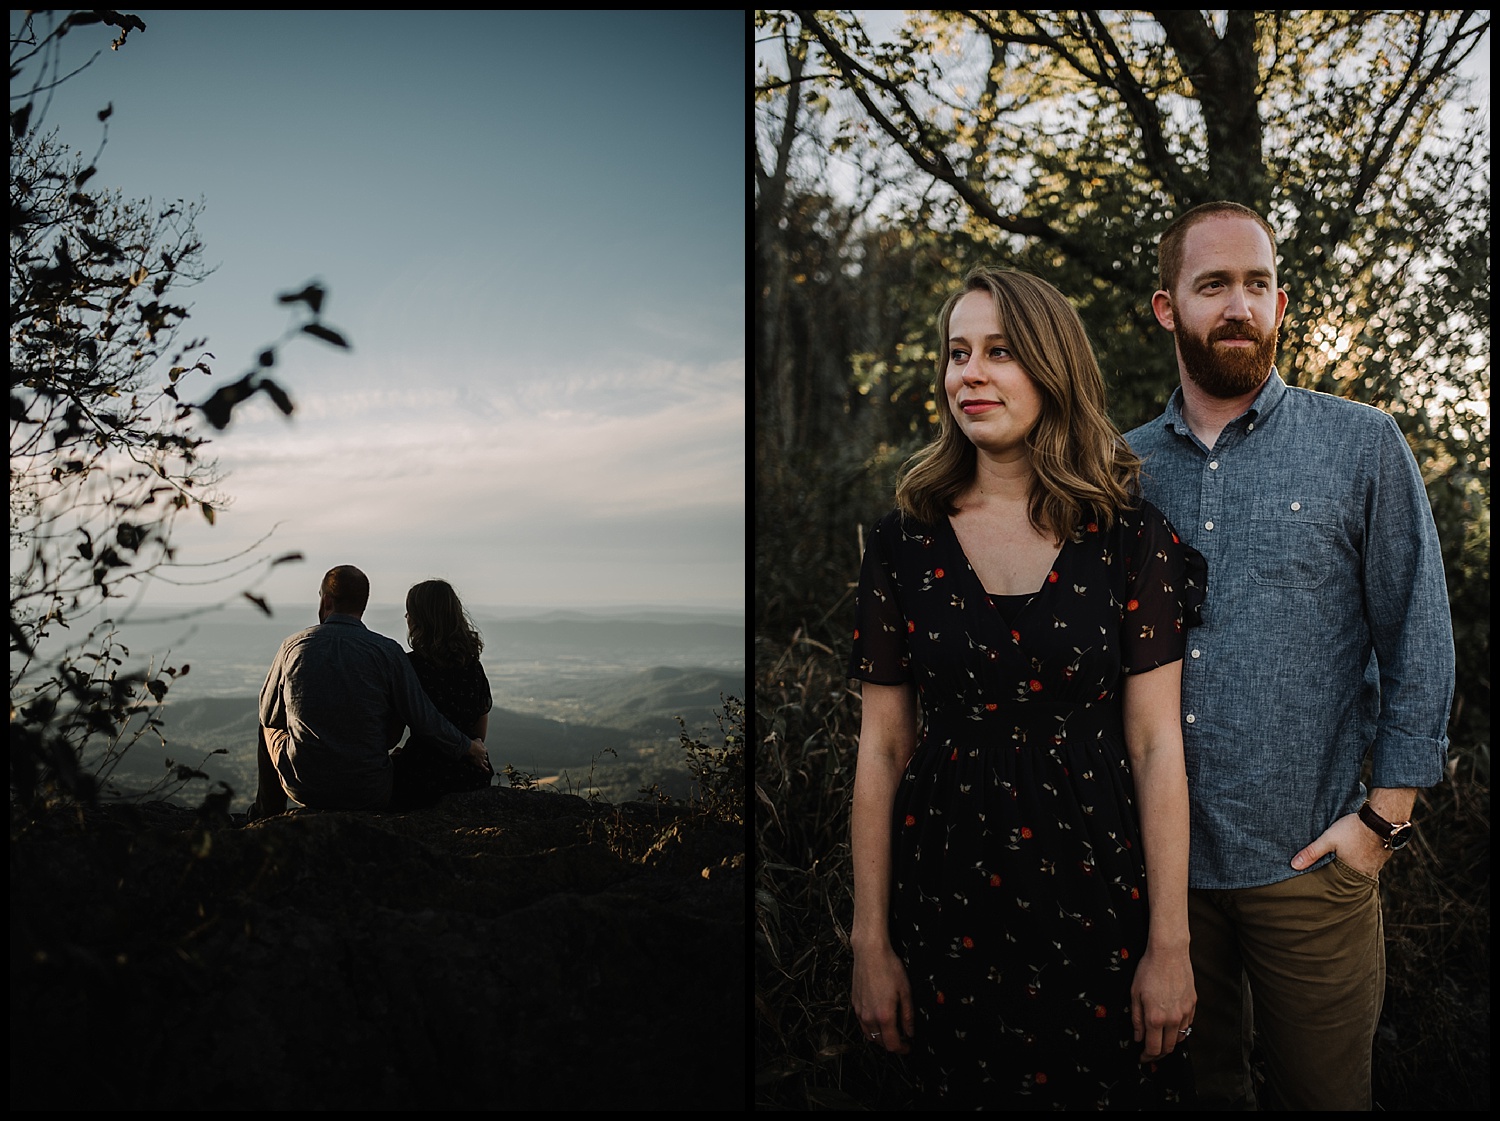 Molly and Zach Engagement Session - Fall Autumn Sunset Couple Adventure Session - Shenandoah National Park - Blue Ridge Parkway Skyline Drive - White Sails Creative_18.jpg